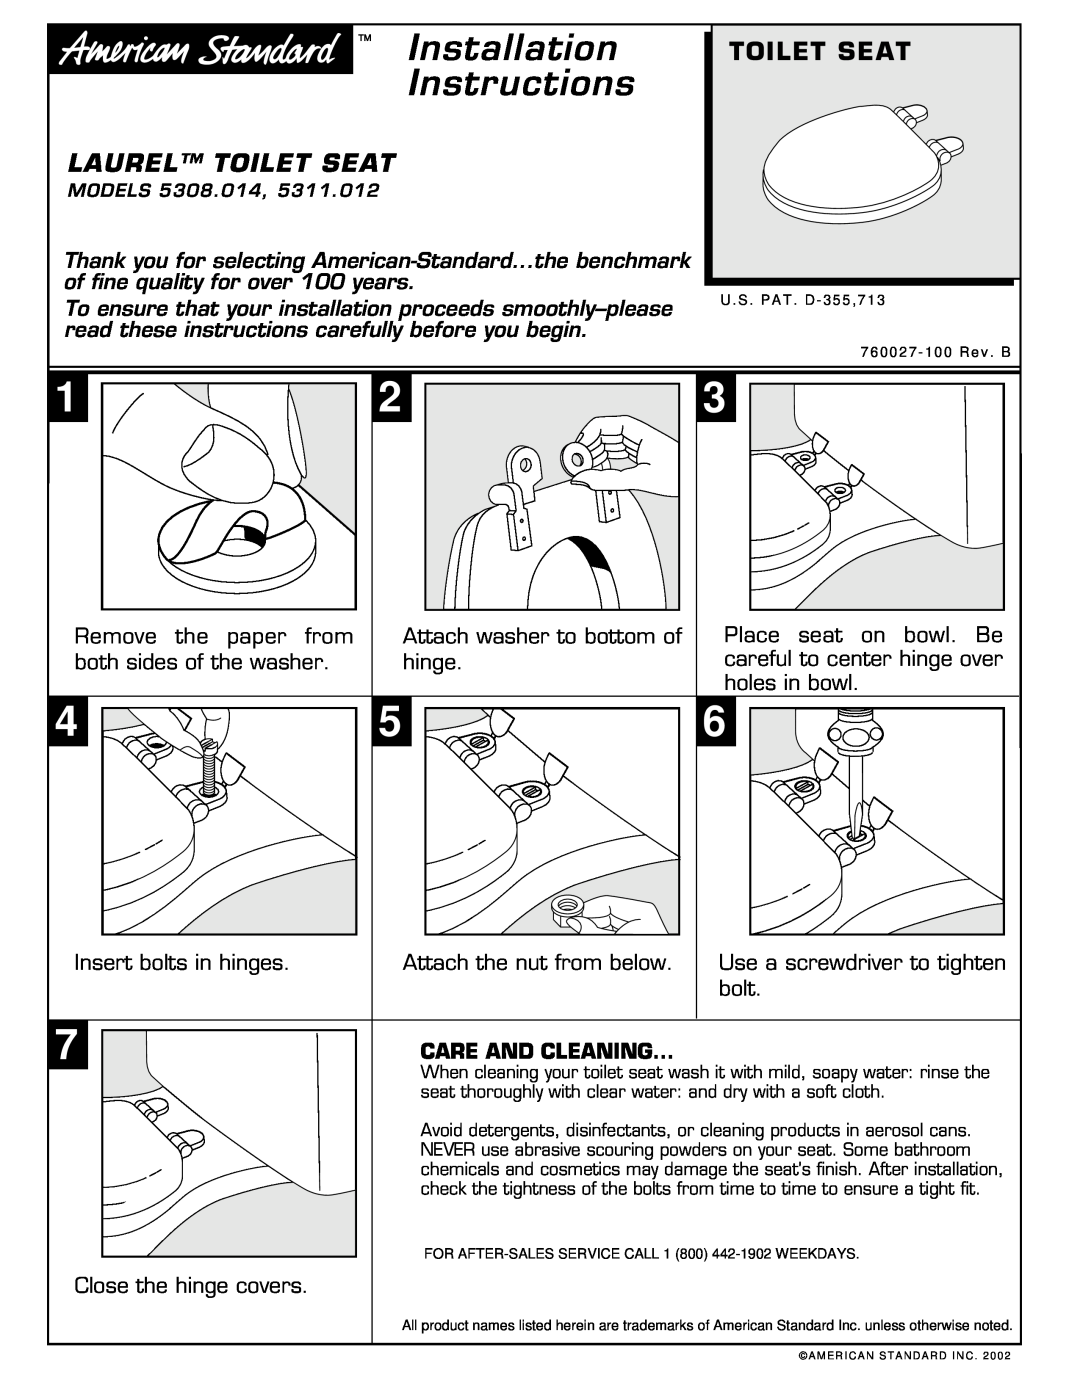 American Standard 5308.014 installation instructions Installation Instructions, Laurel Toilet Seat, Care And Cleaning 